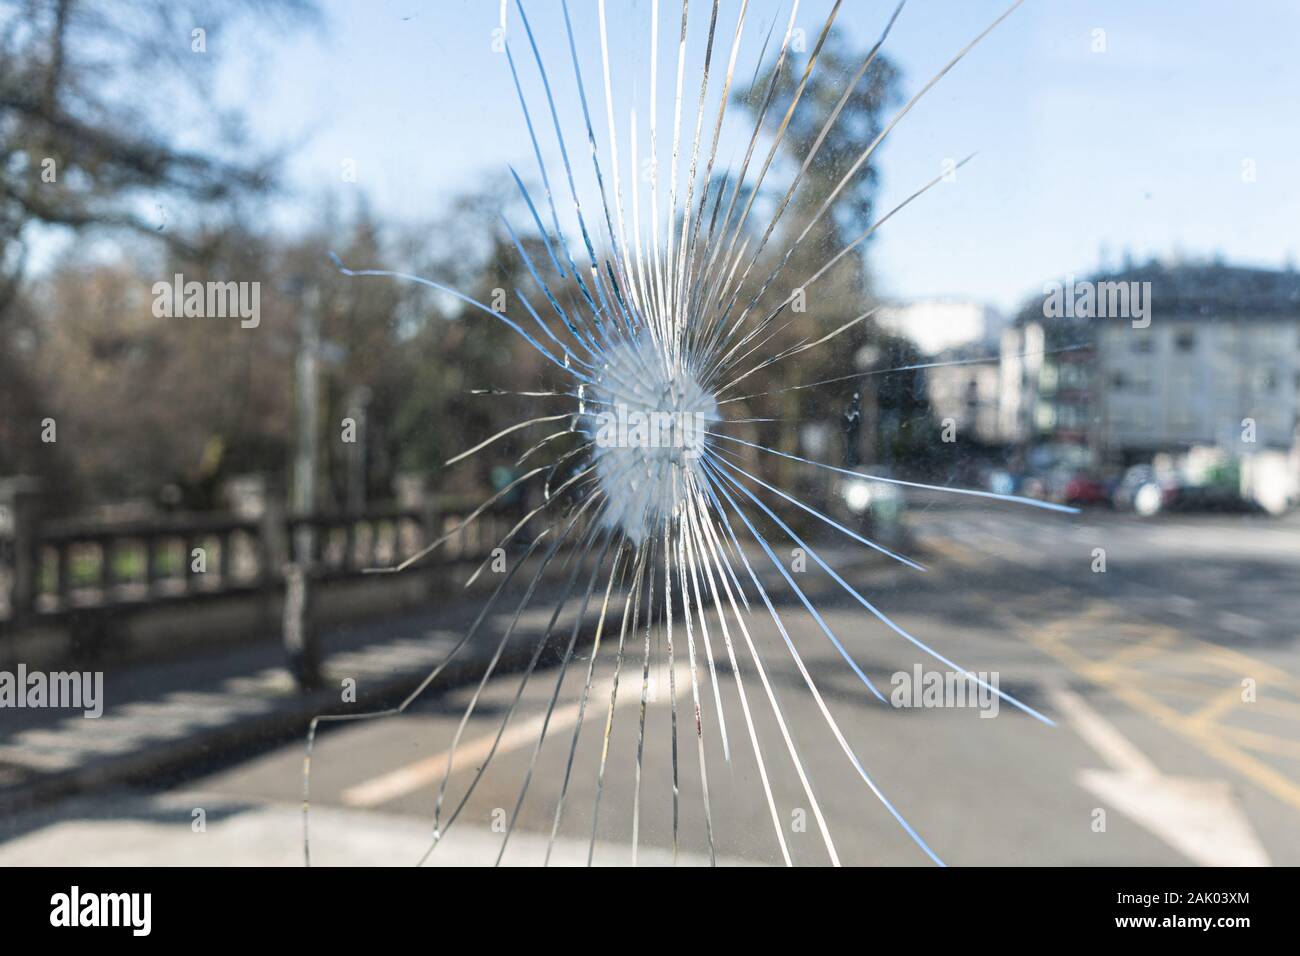 Broken glass with cracks and blurred city background. Vandalism concept or social problems Stock Photo